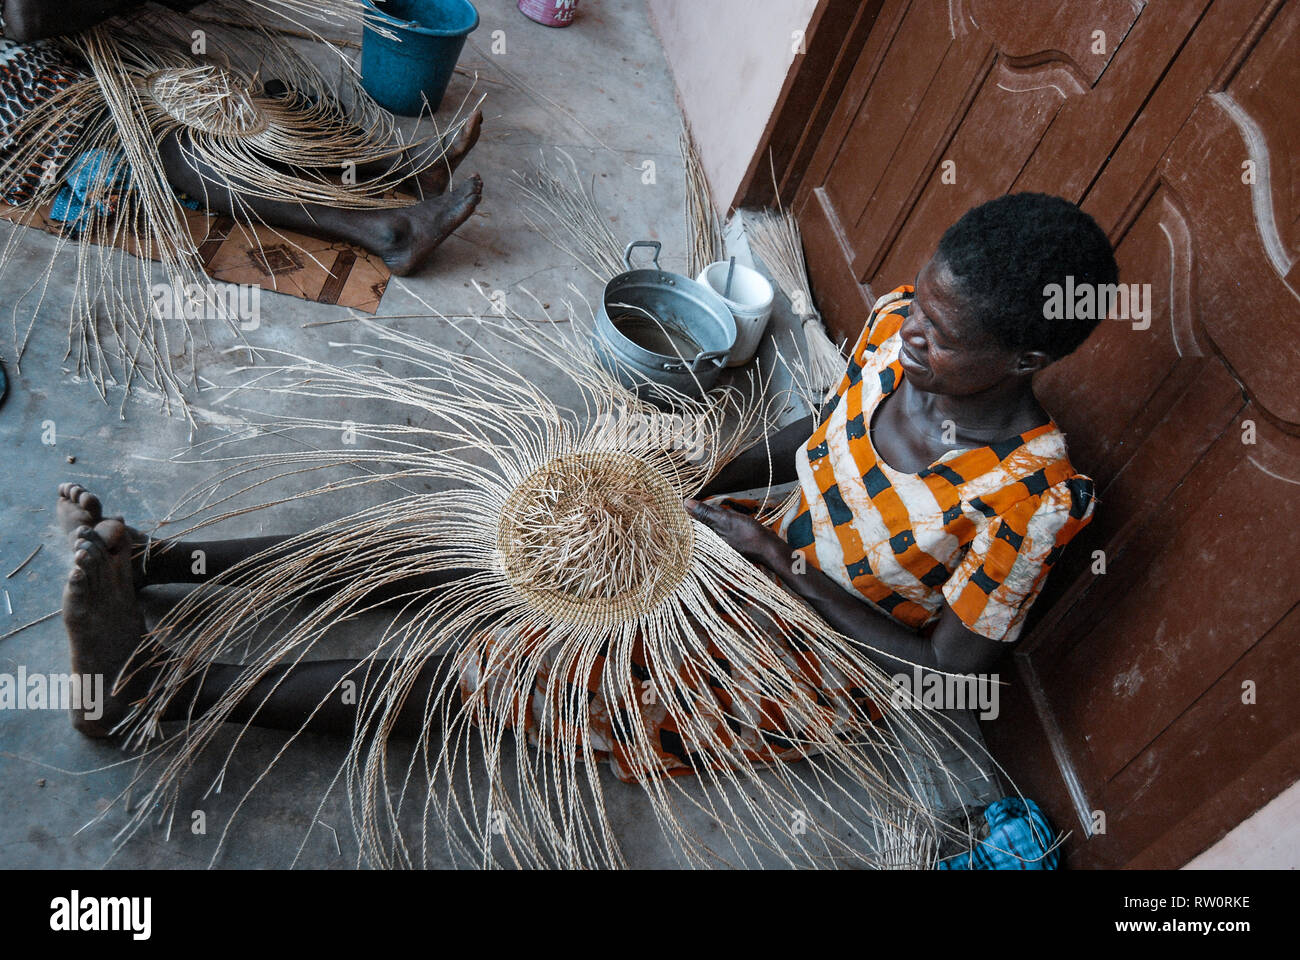 A photo of a local Ghanaian woman weaving the famous decorative and beautiful Bolga market basket. Stock Photo